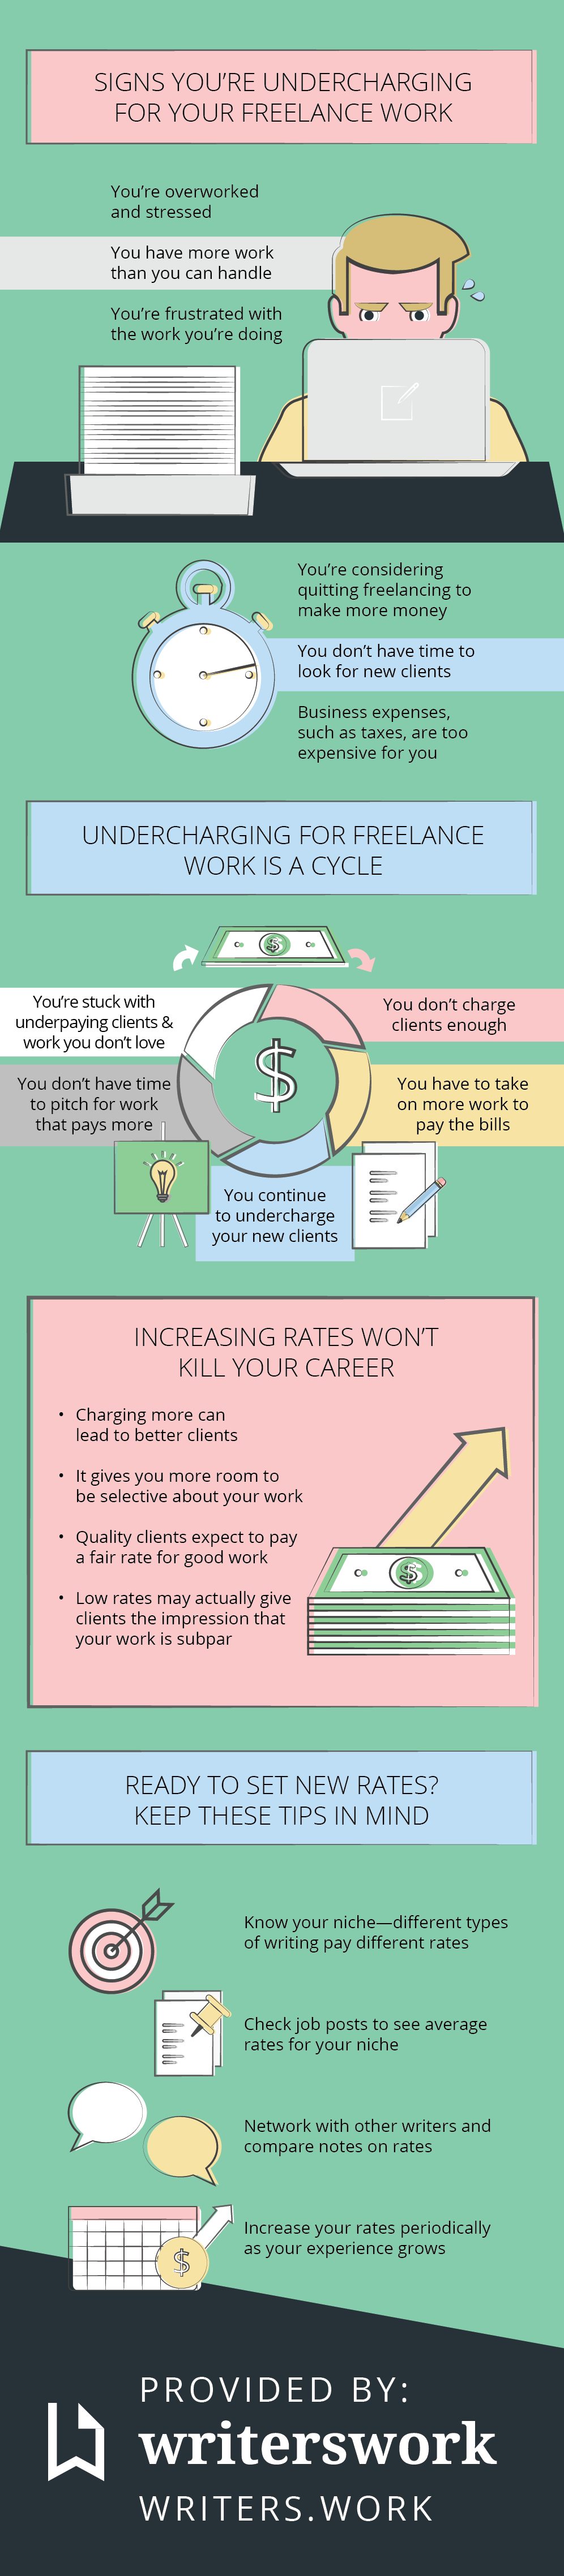 Undercharging for freelance writing infographic